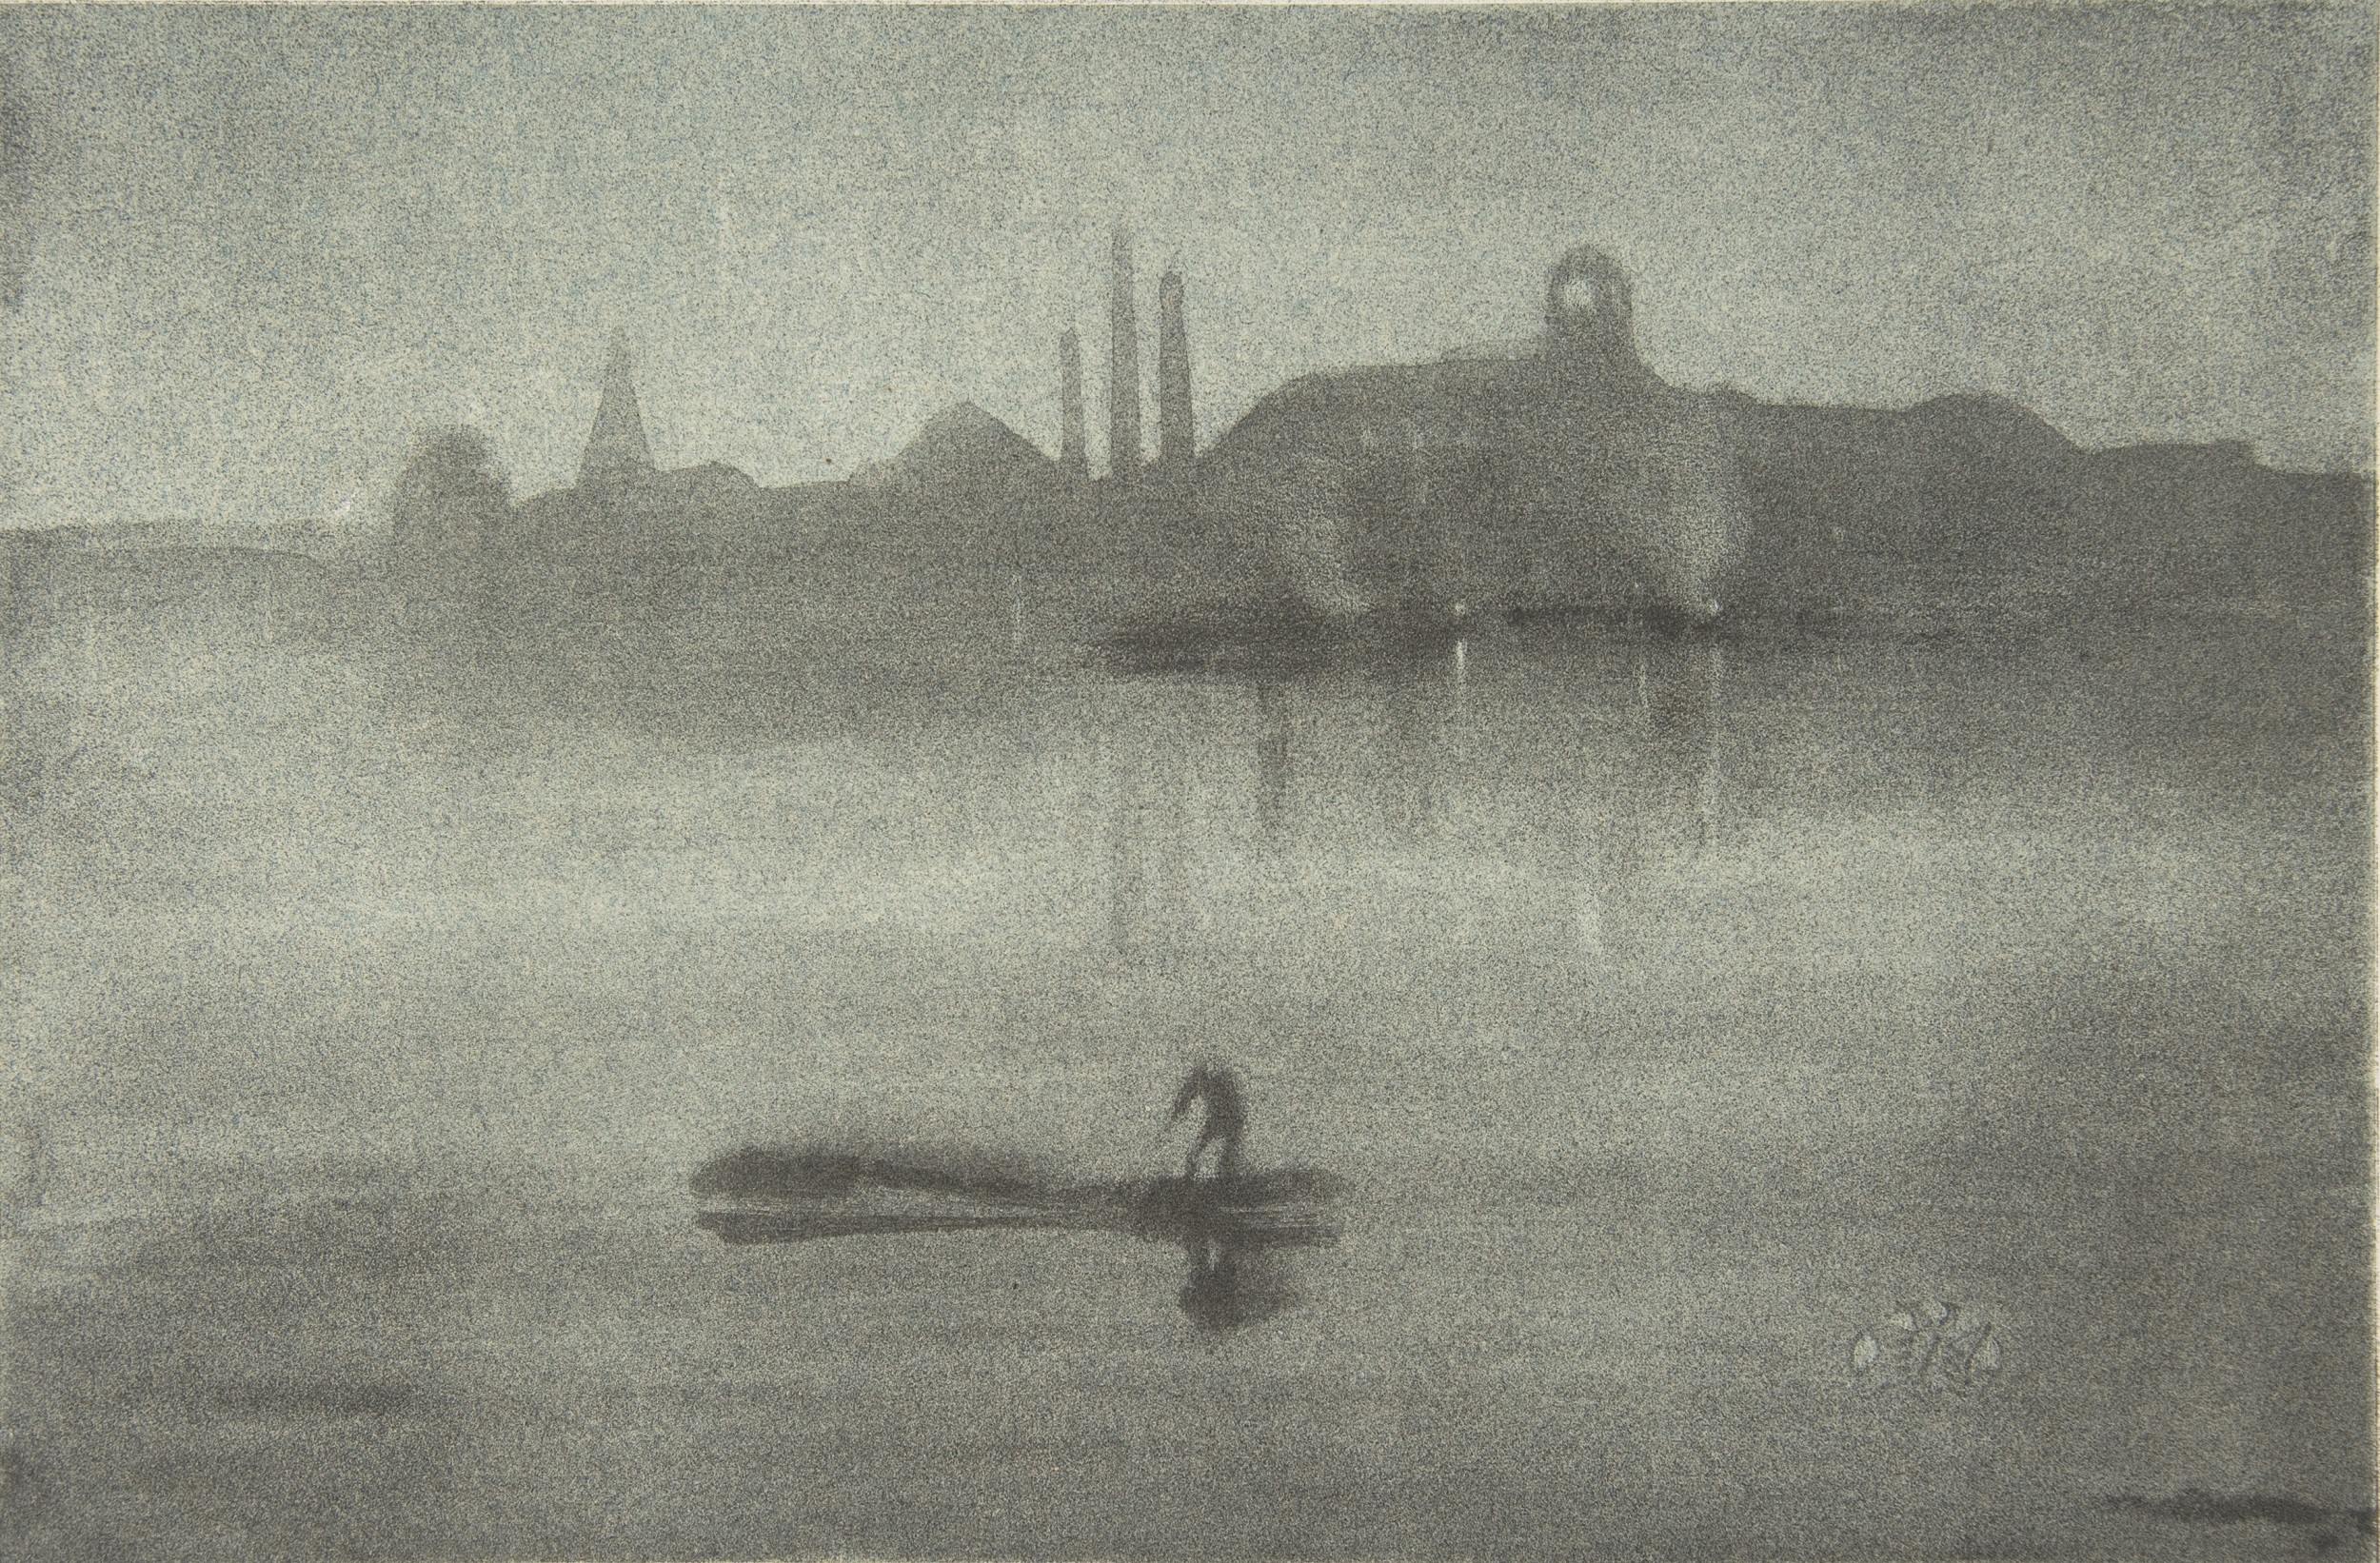 Black-and-white print of a distant shore silhouetted against a twilight sky, with three prominent smokestacks in the center. In the foreground is a silhouette of a figure standing in a low rowboat.